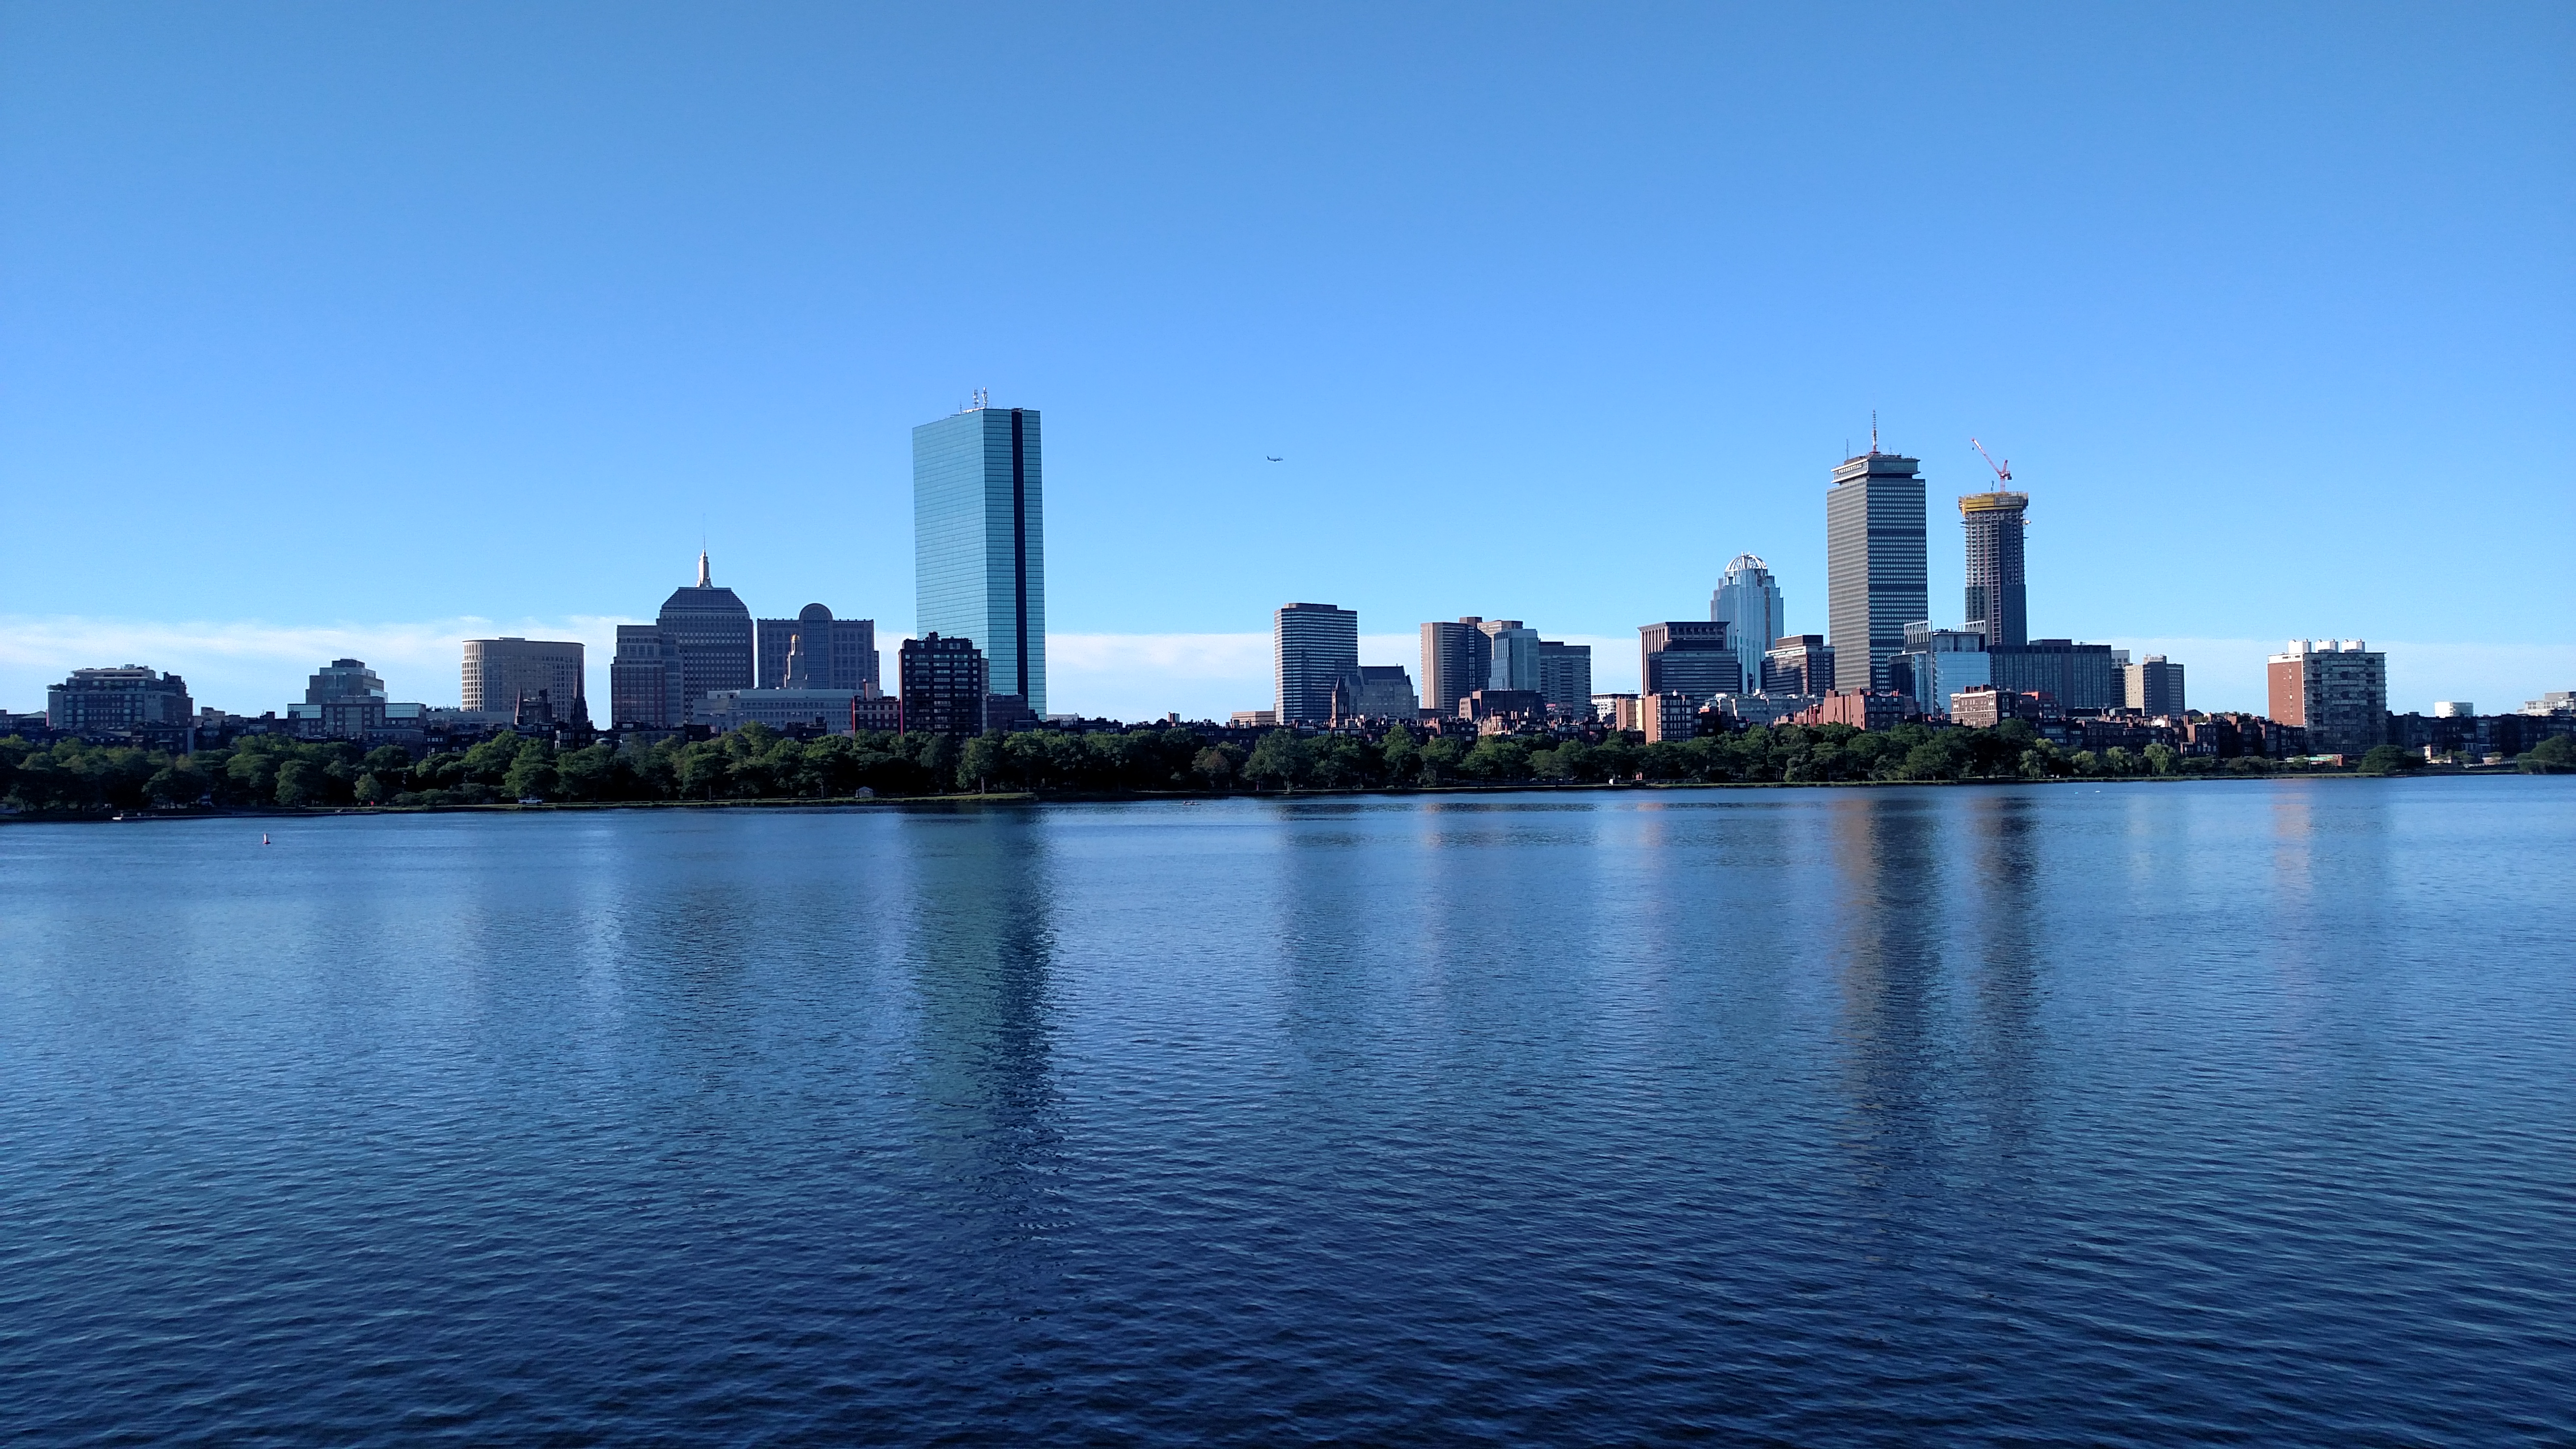 View of Boston, MA from the Charles River